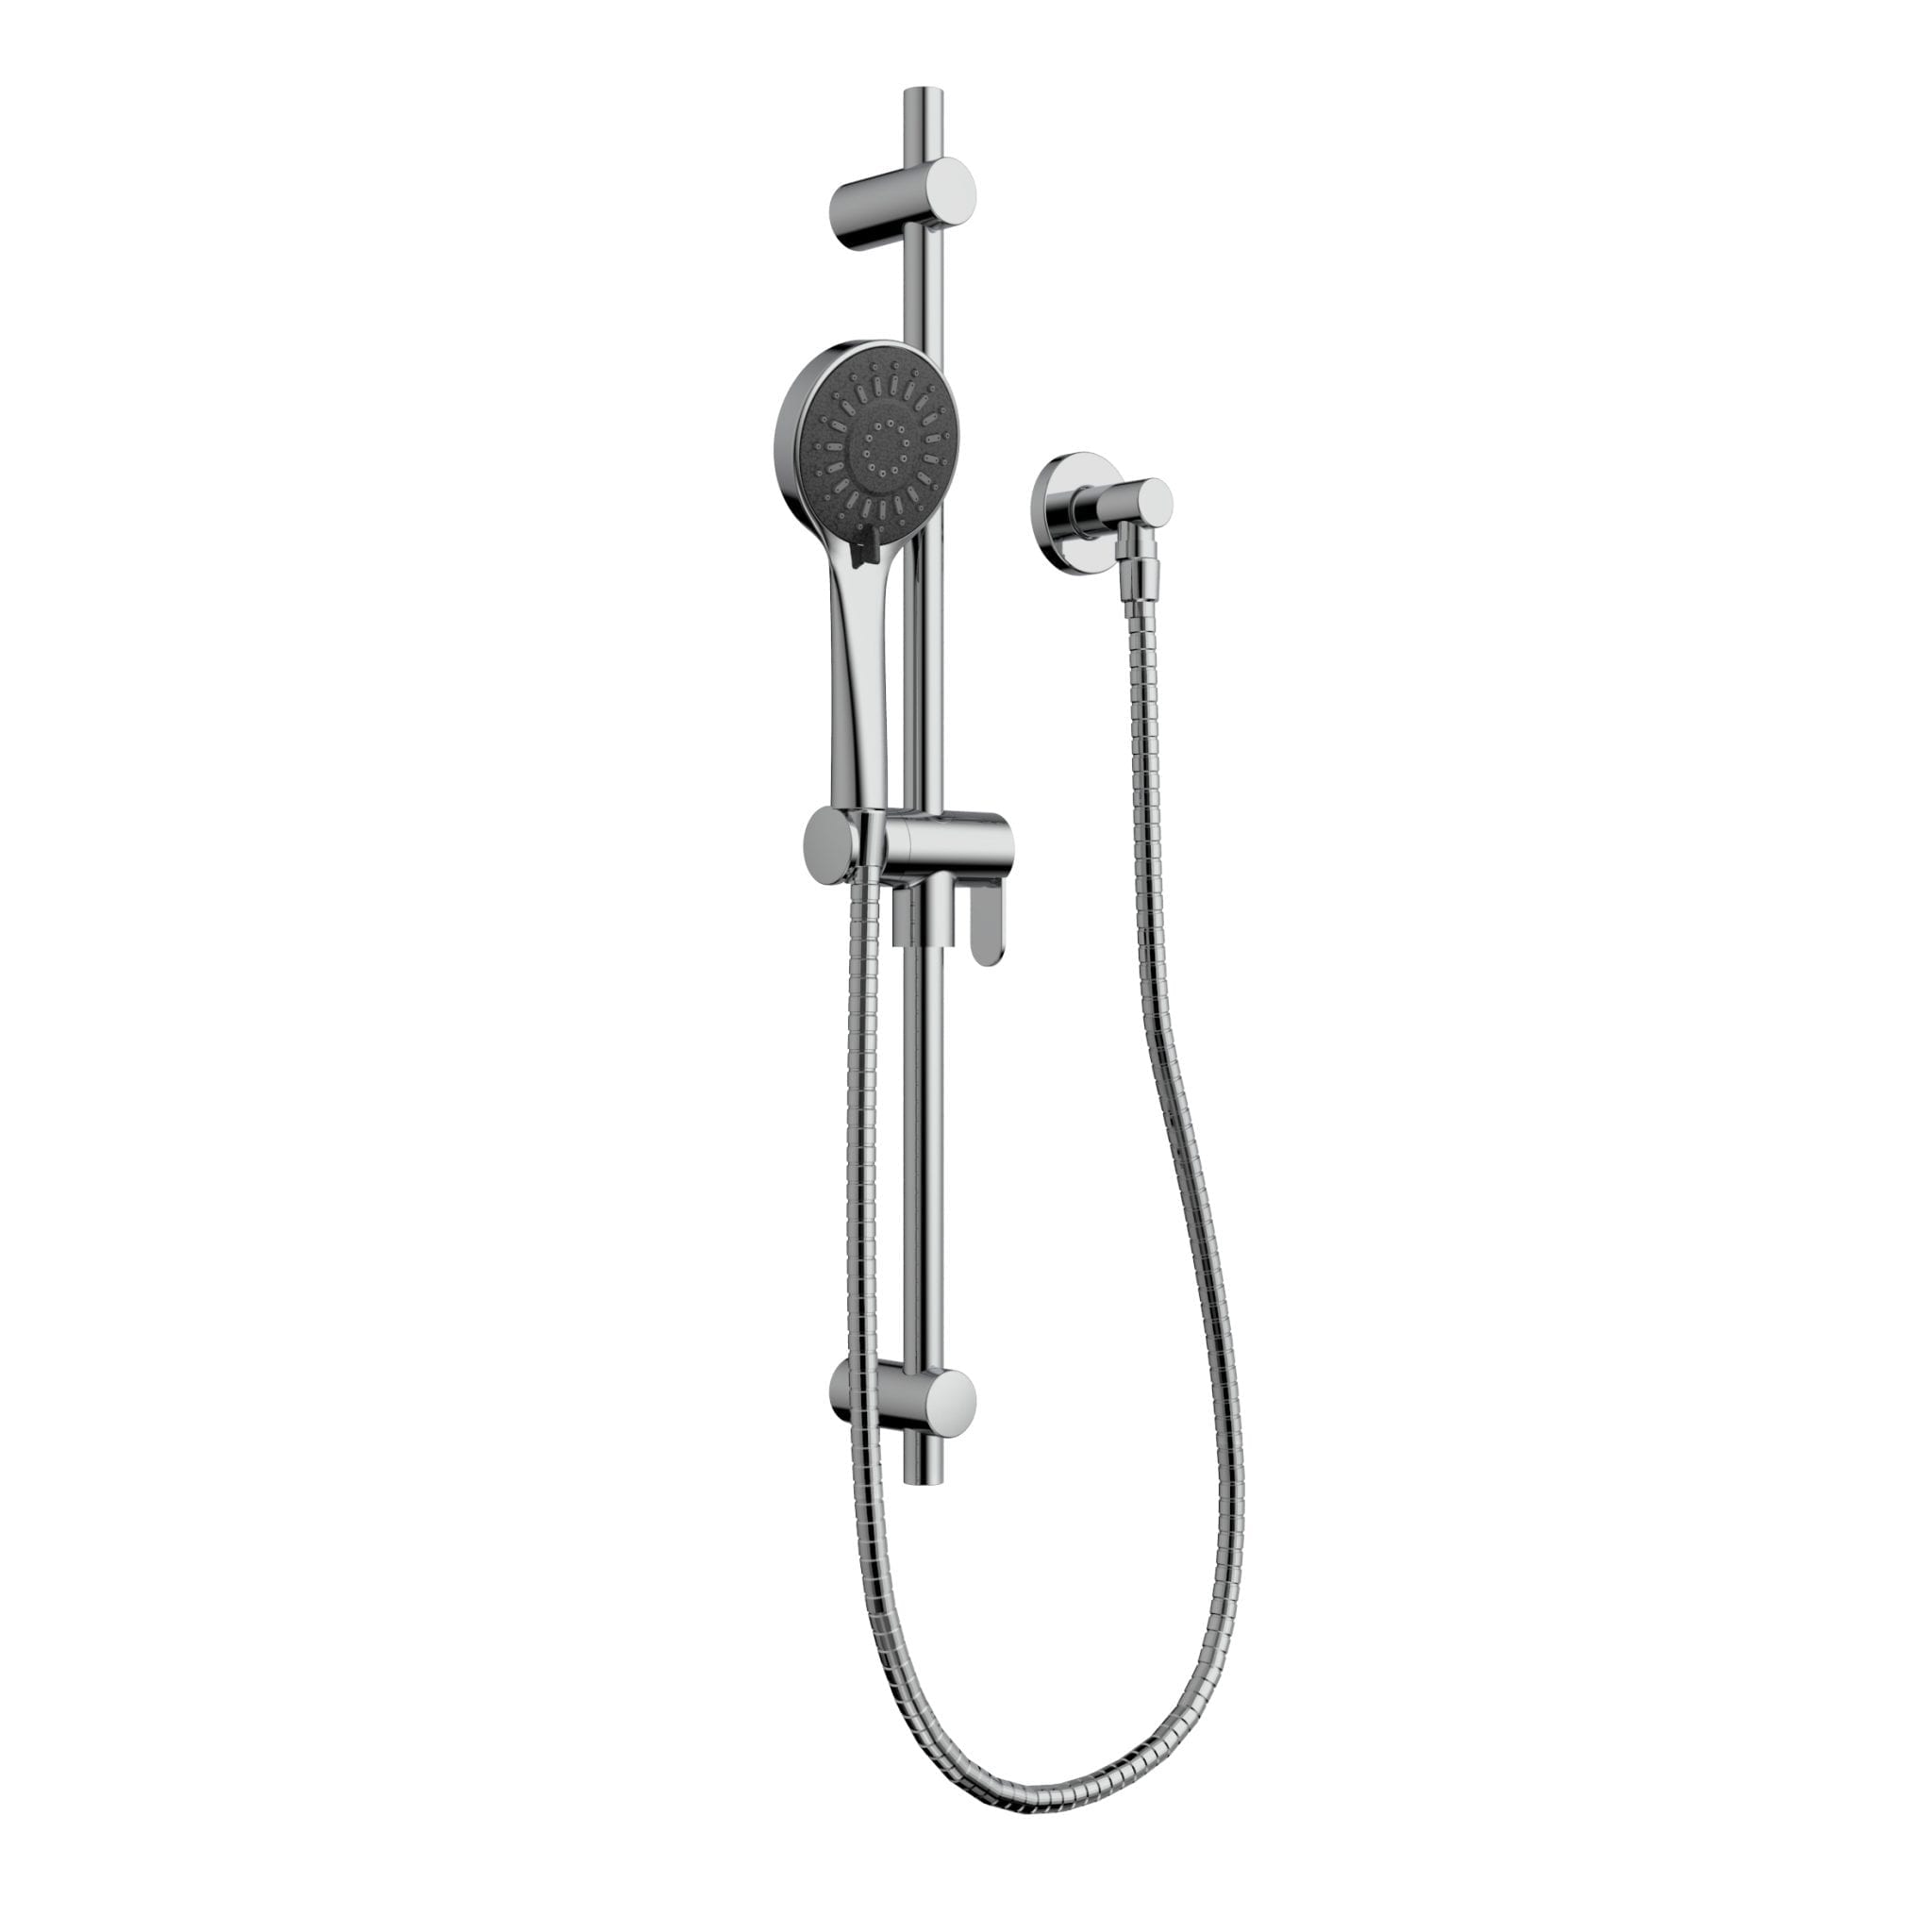 Bélanger B90-732- Sliding Bar Kit (Round) With Multi-Function Hand Shower, Water Supply Elbow And Flexible Hose